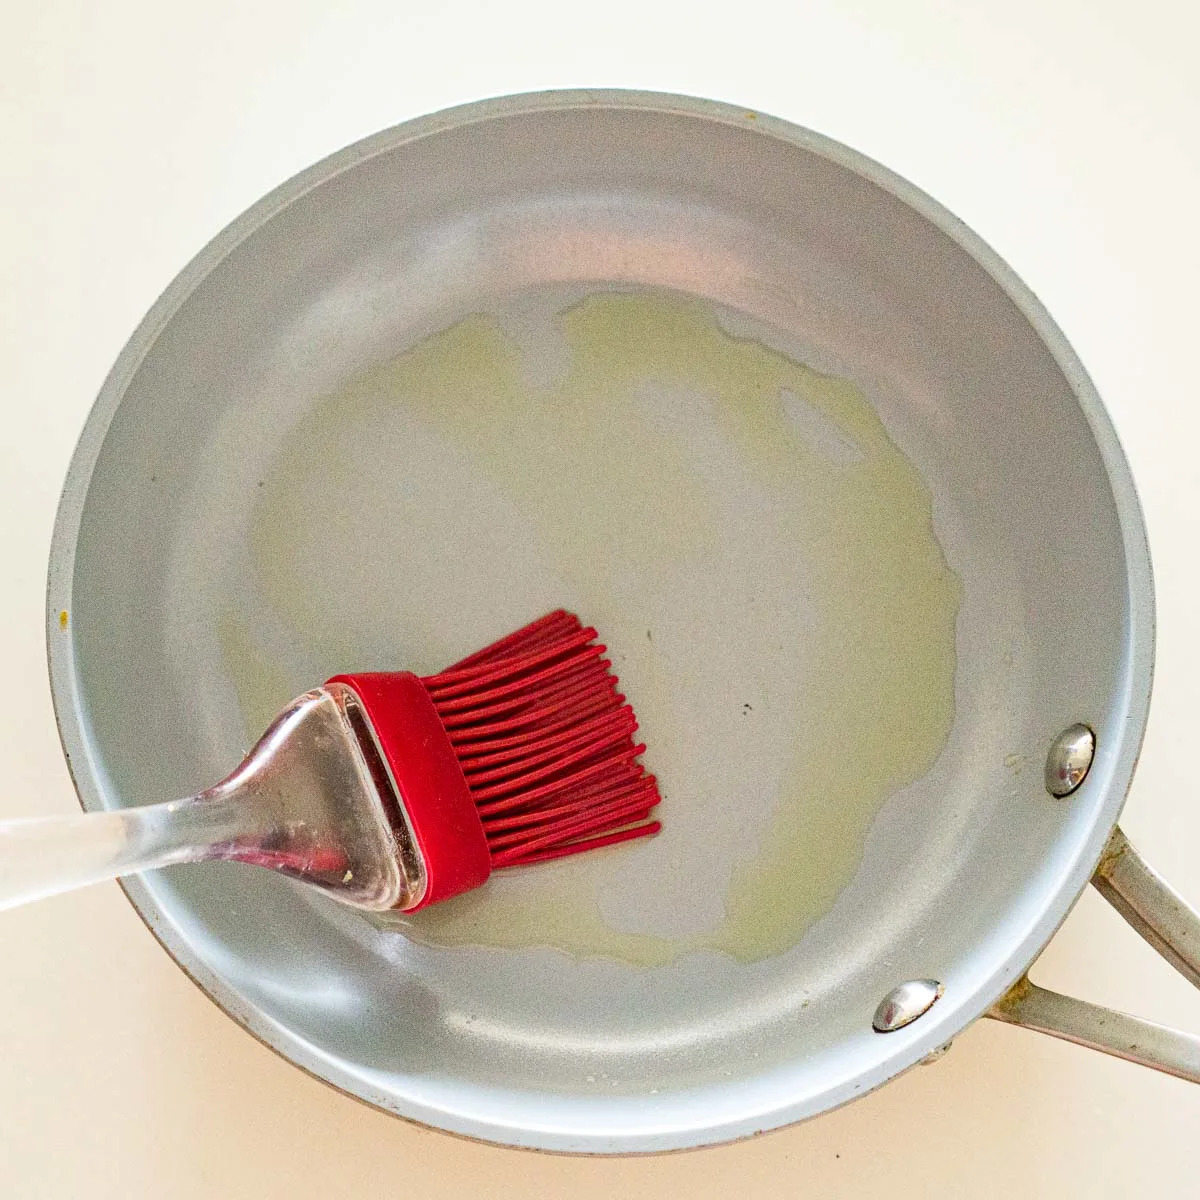 Brushing a non stick pan with oil.